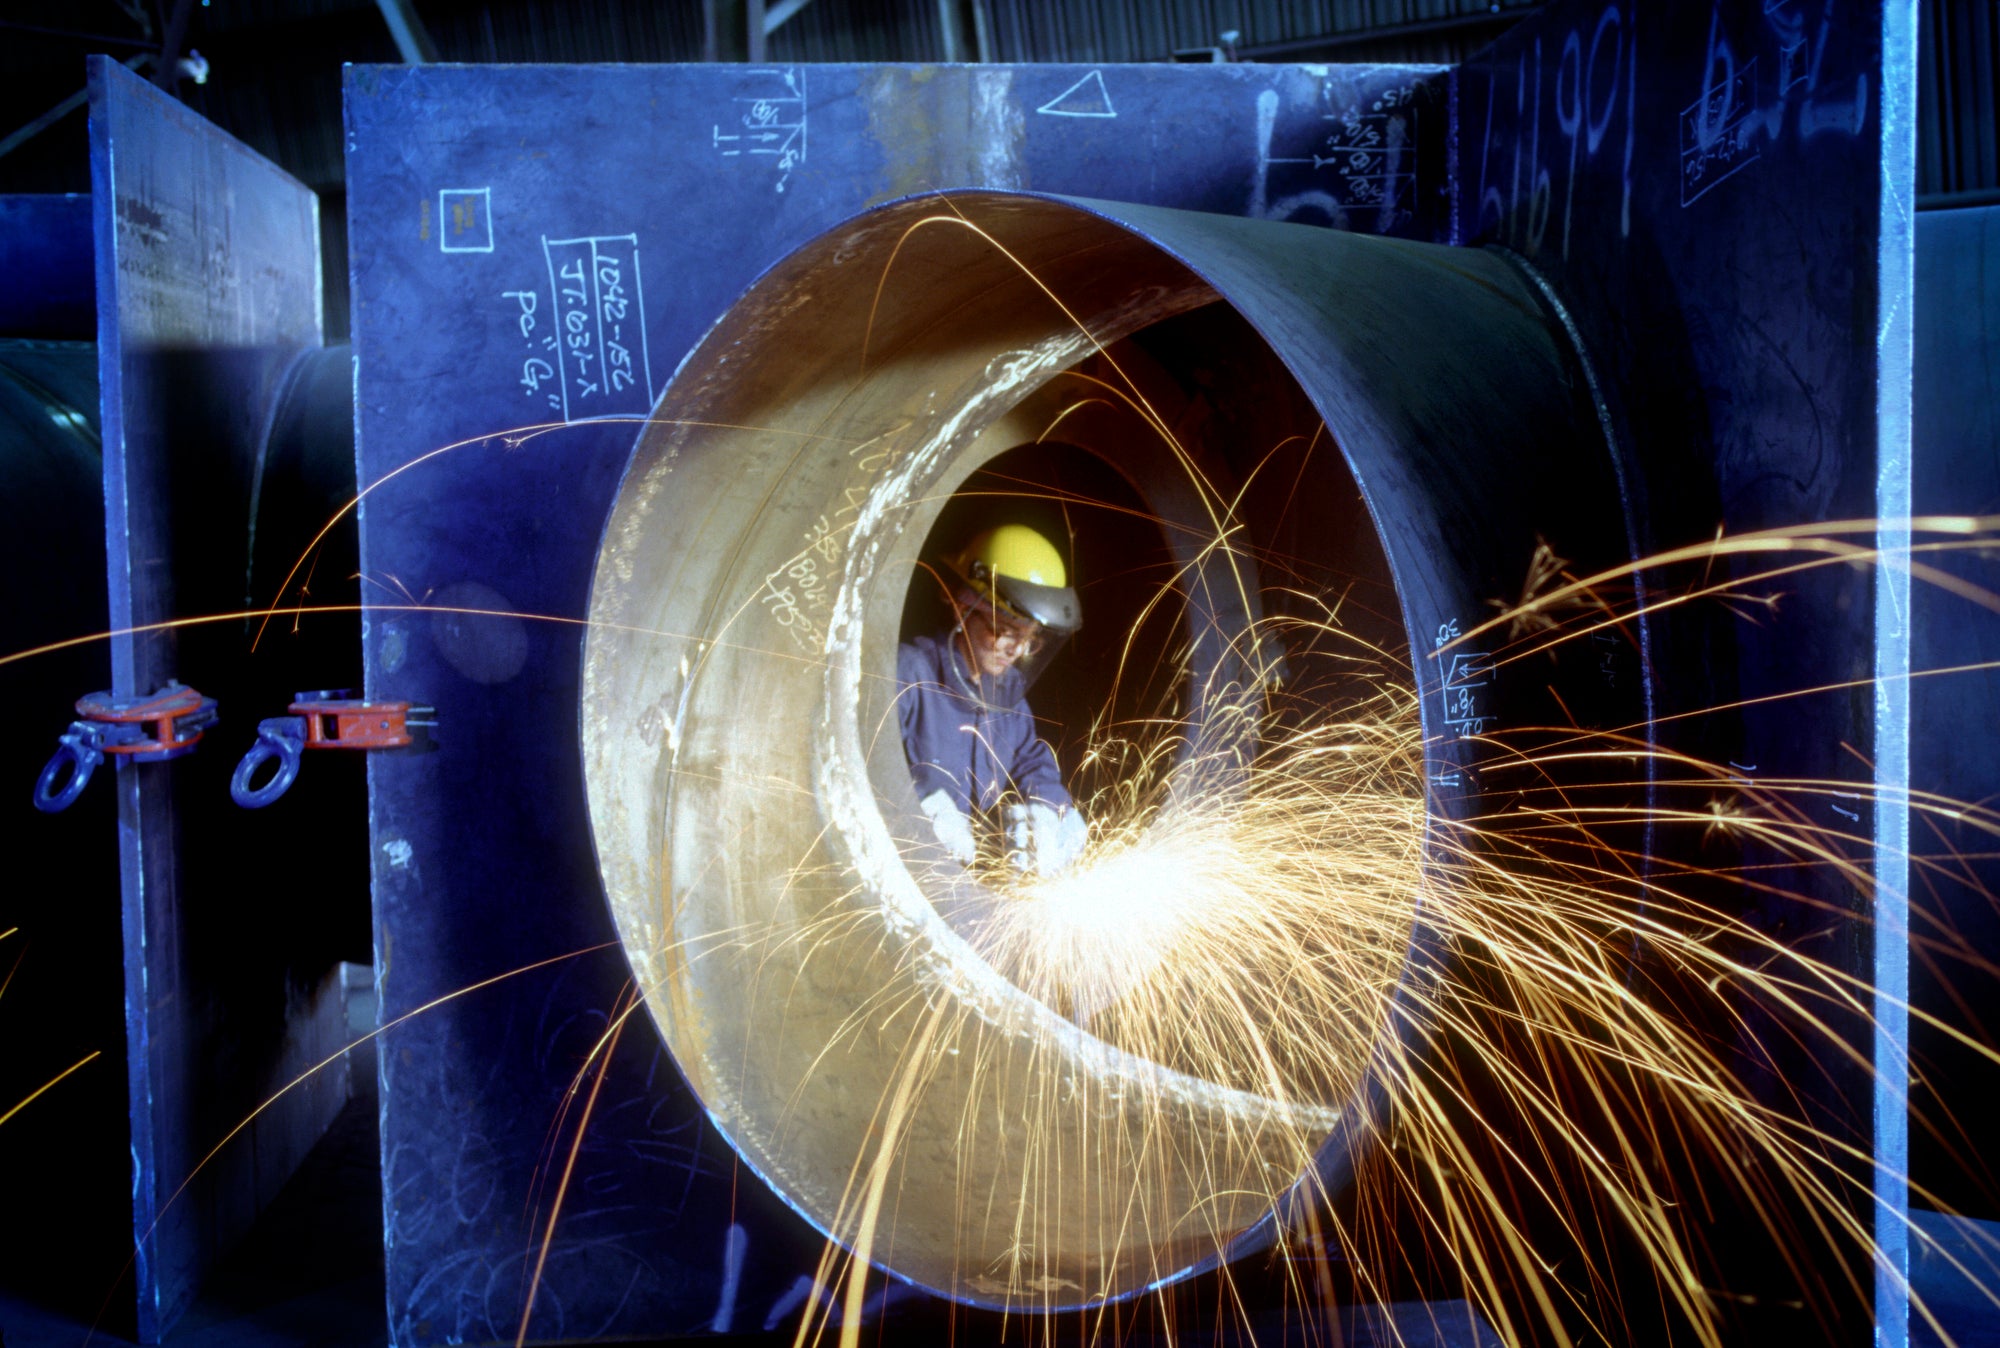 sparks fly as a person welds inside of a large pipe